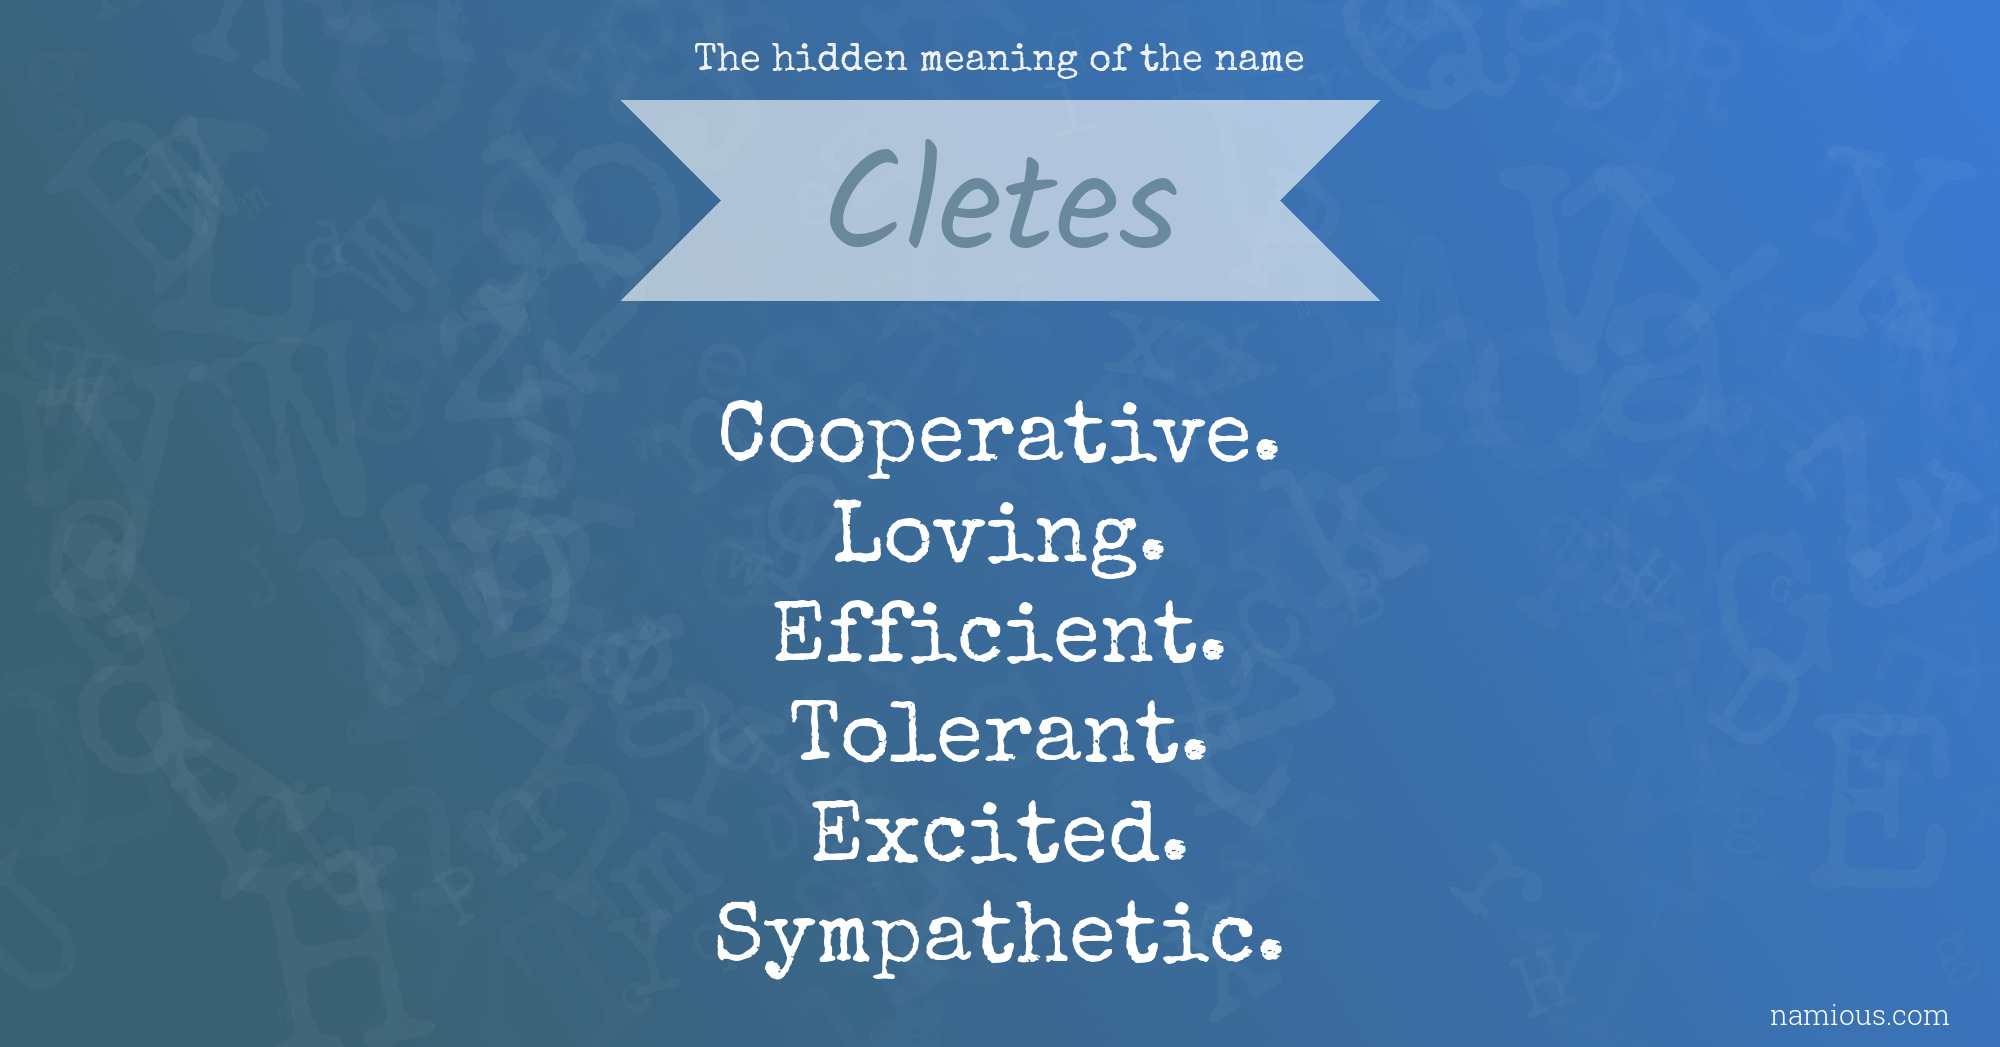 The hidden meaning of the name Cletes